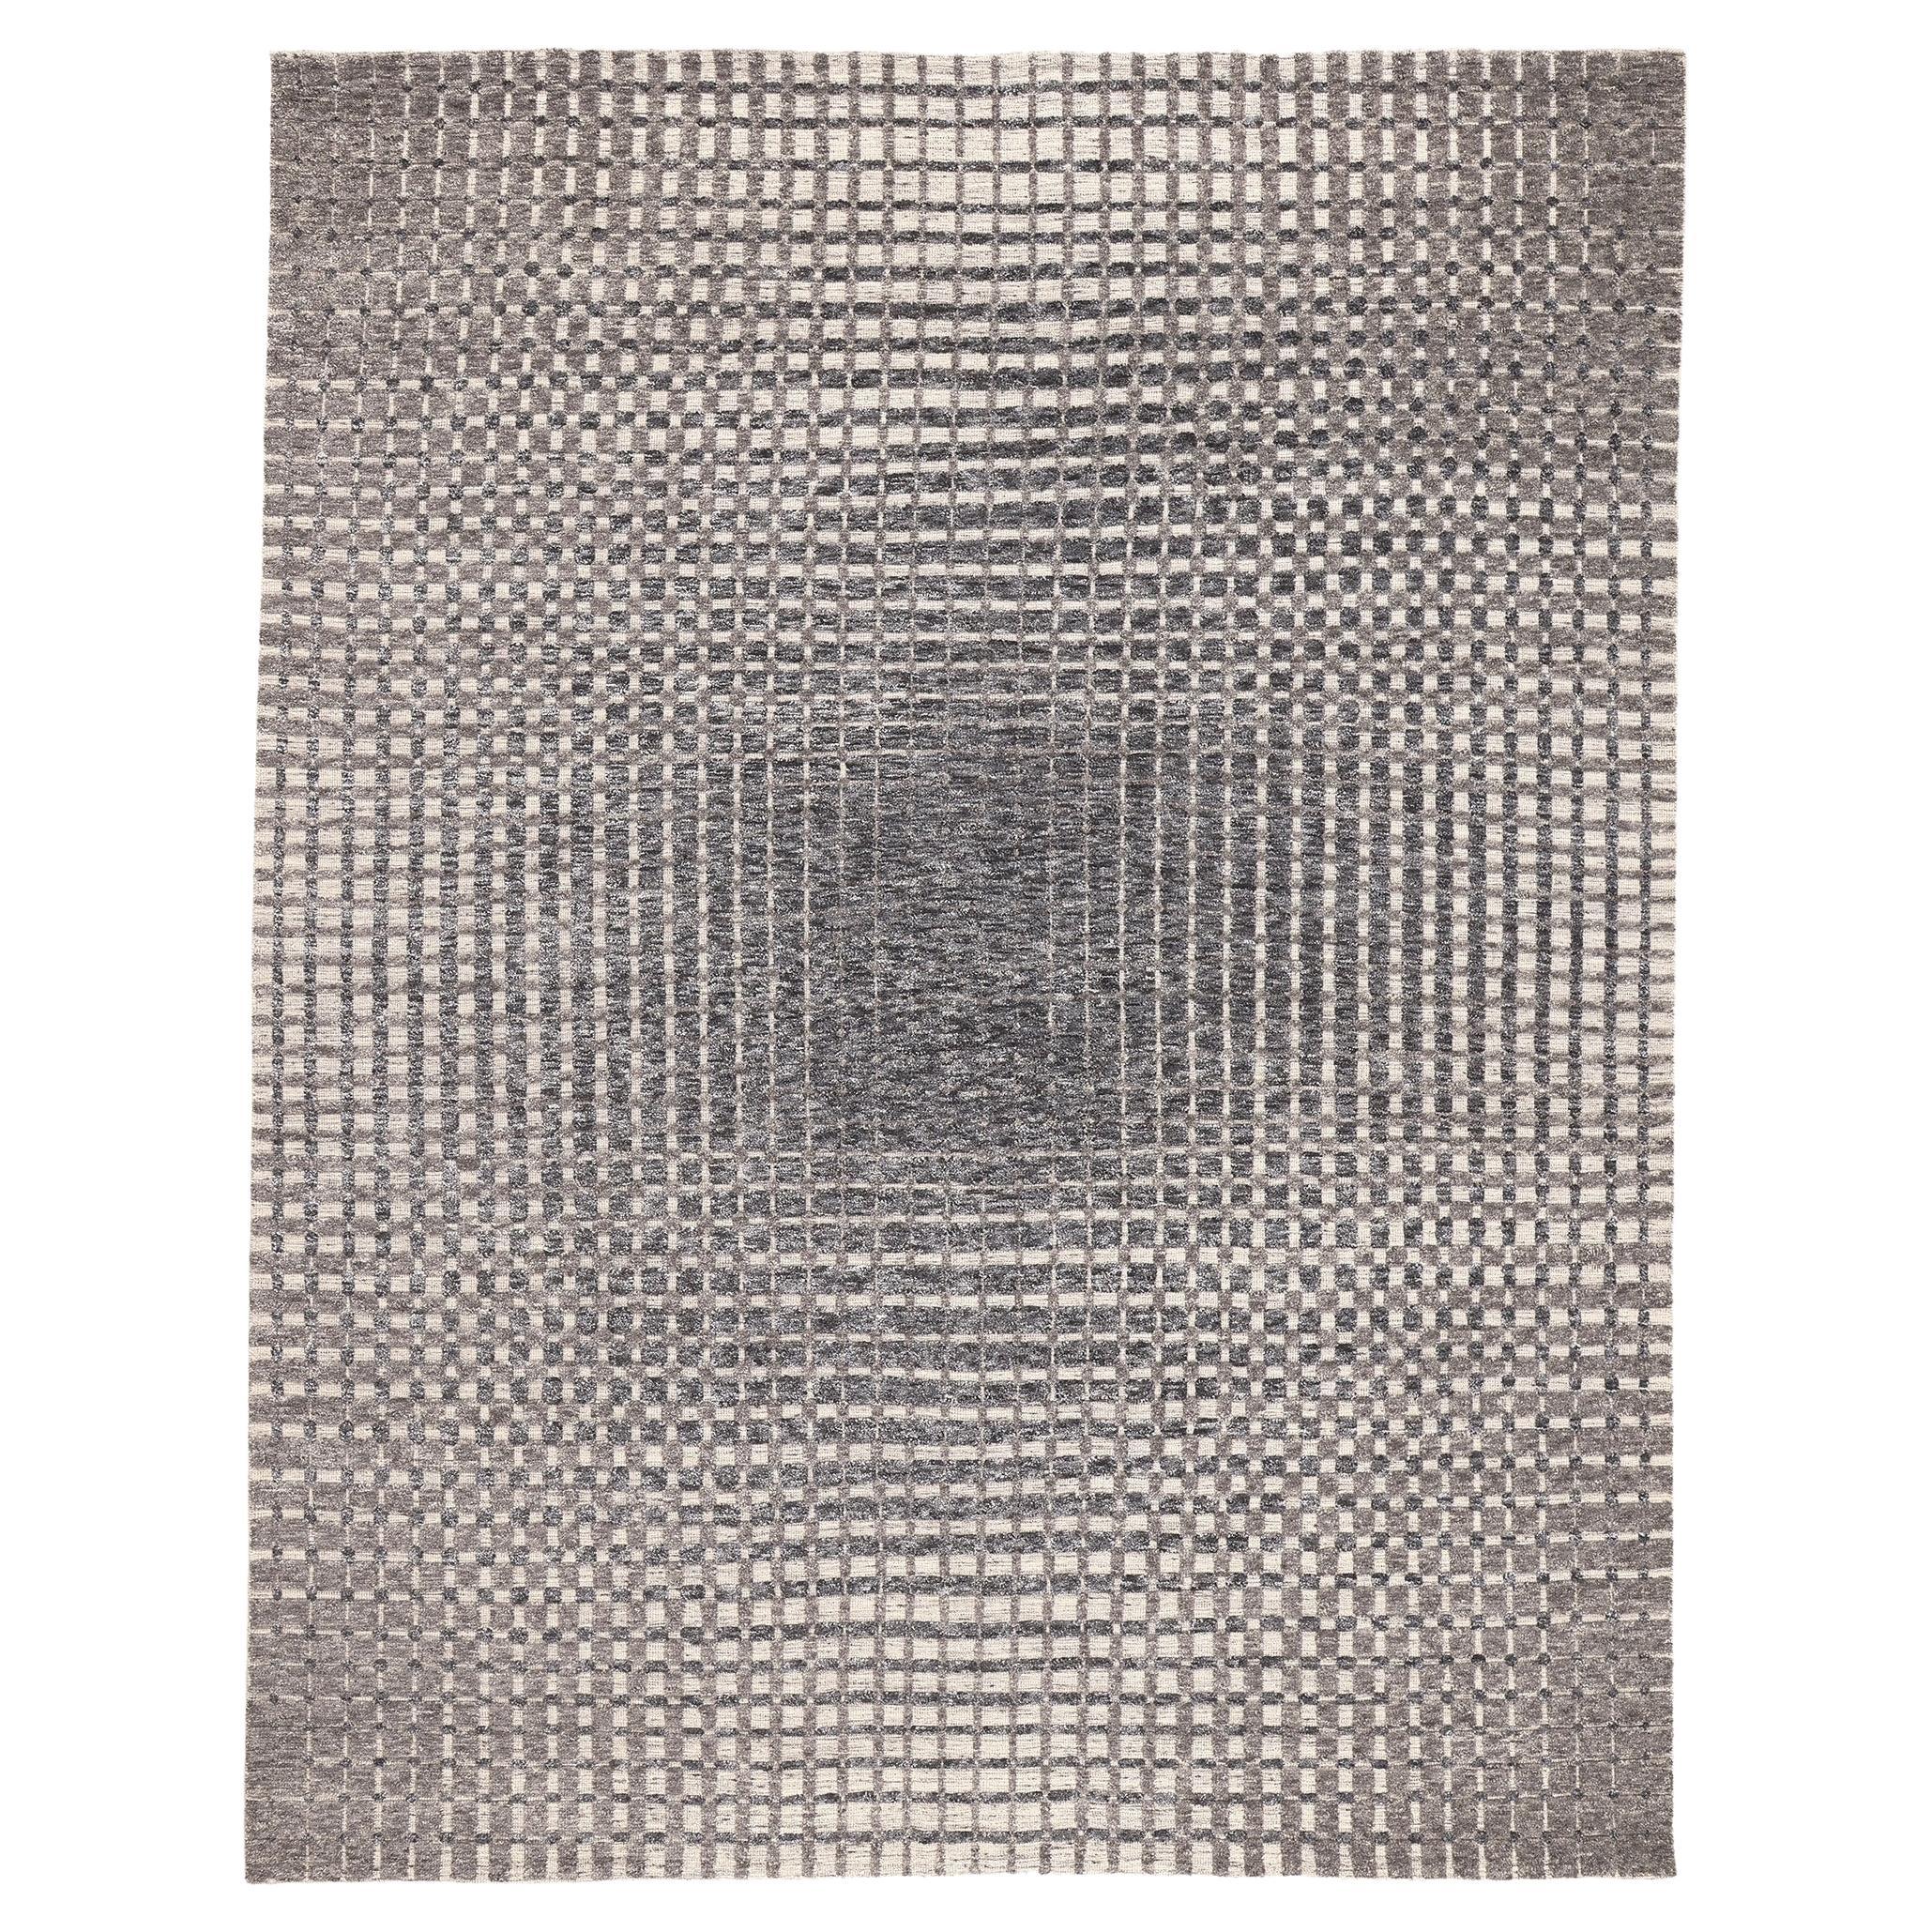 Modern Gray Geometric High-Low Rug, Subsuming Beauty Meets Visual Complexity